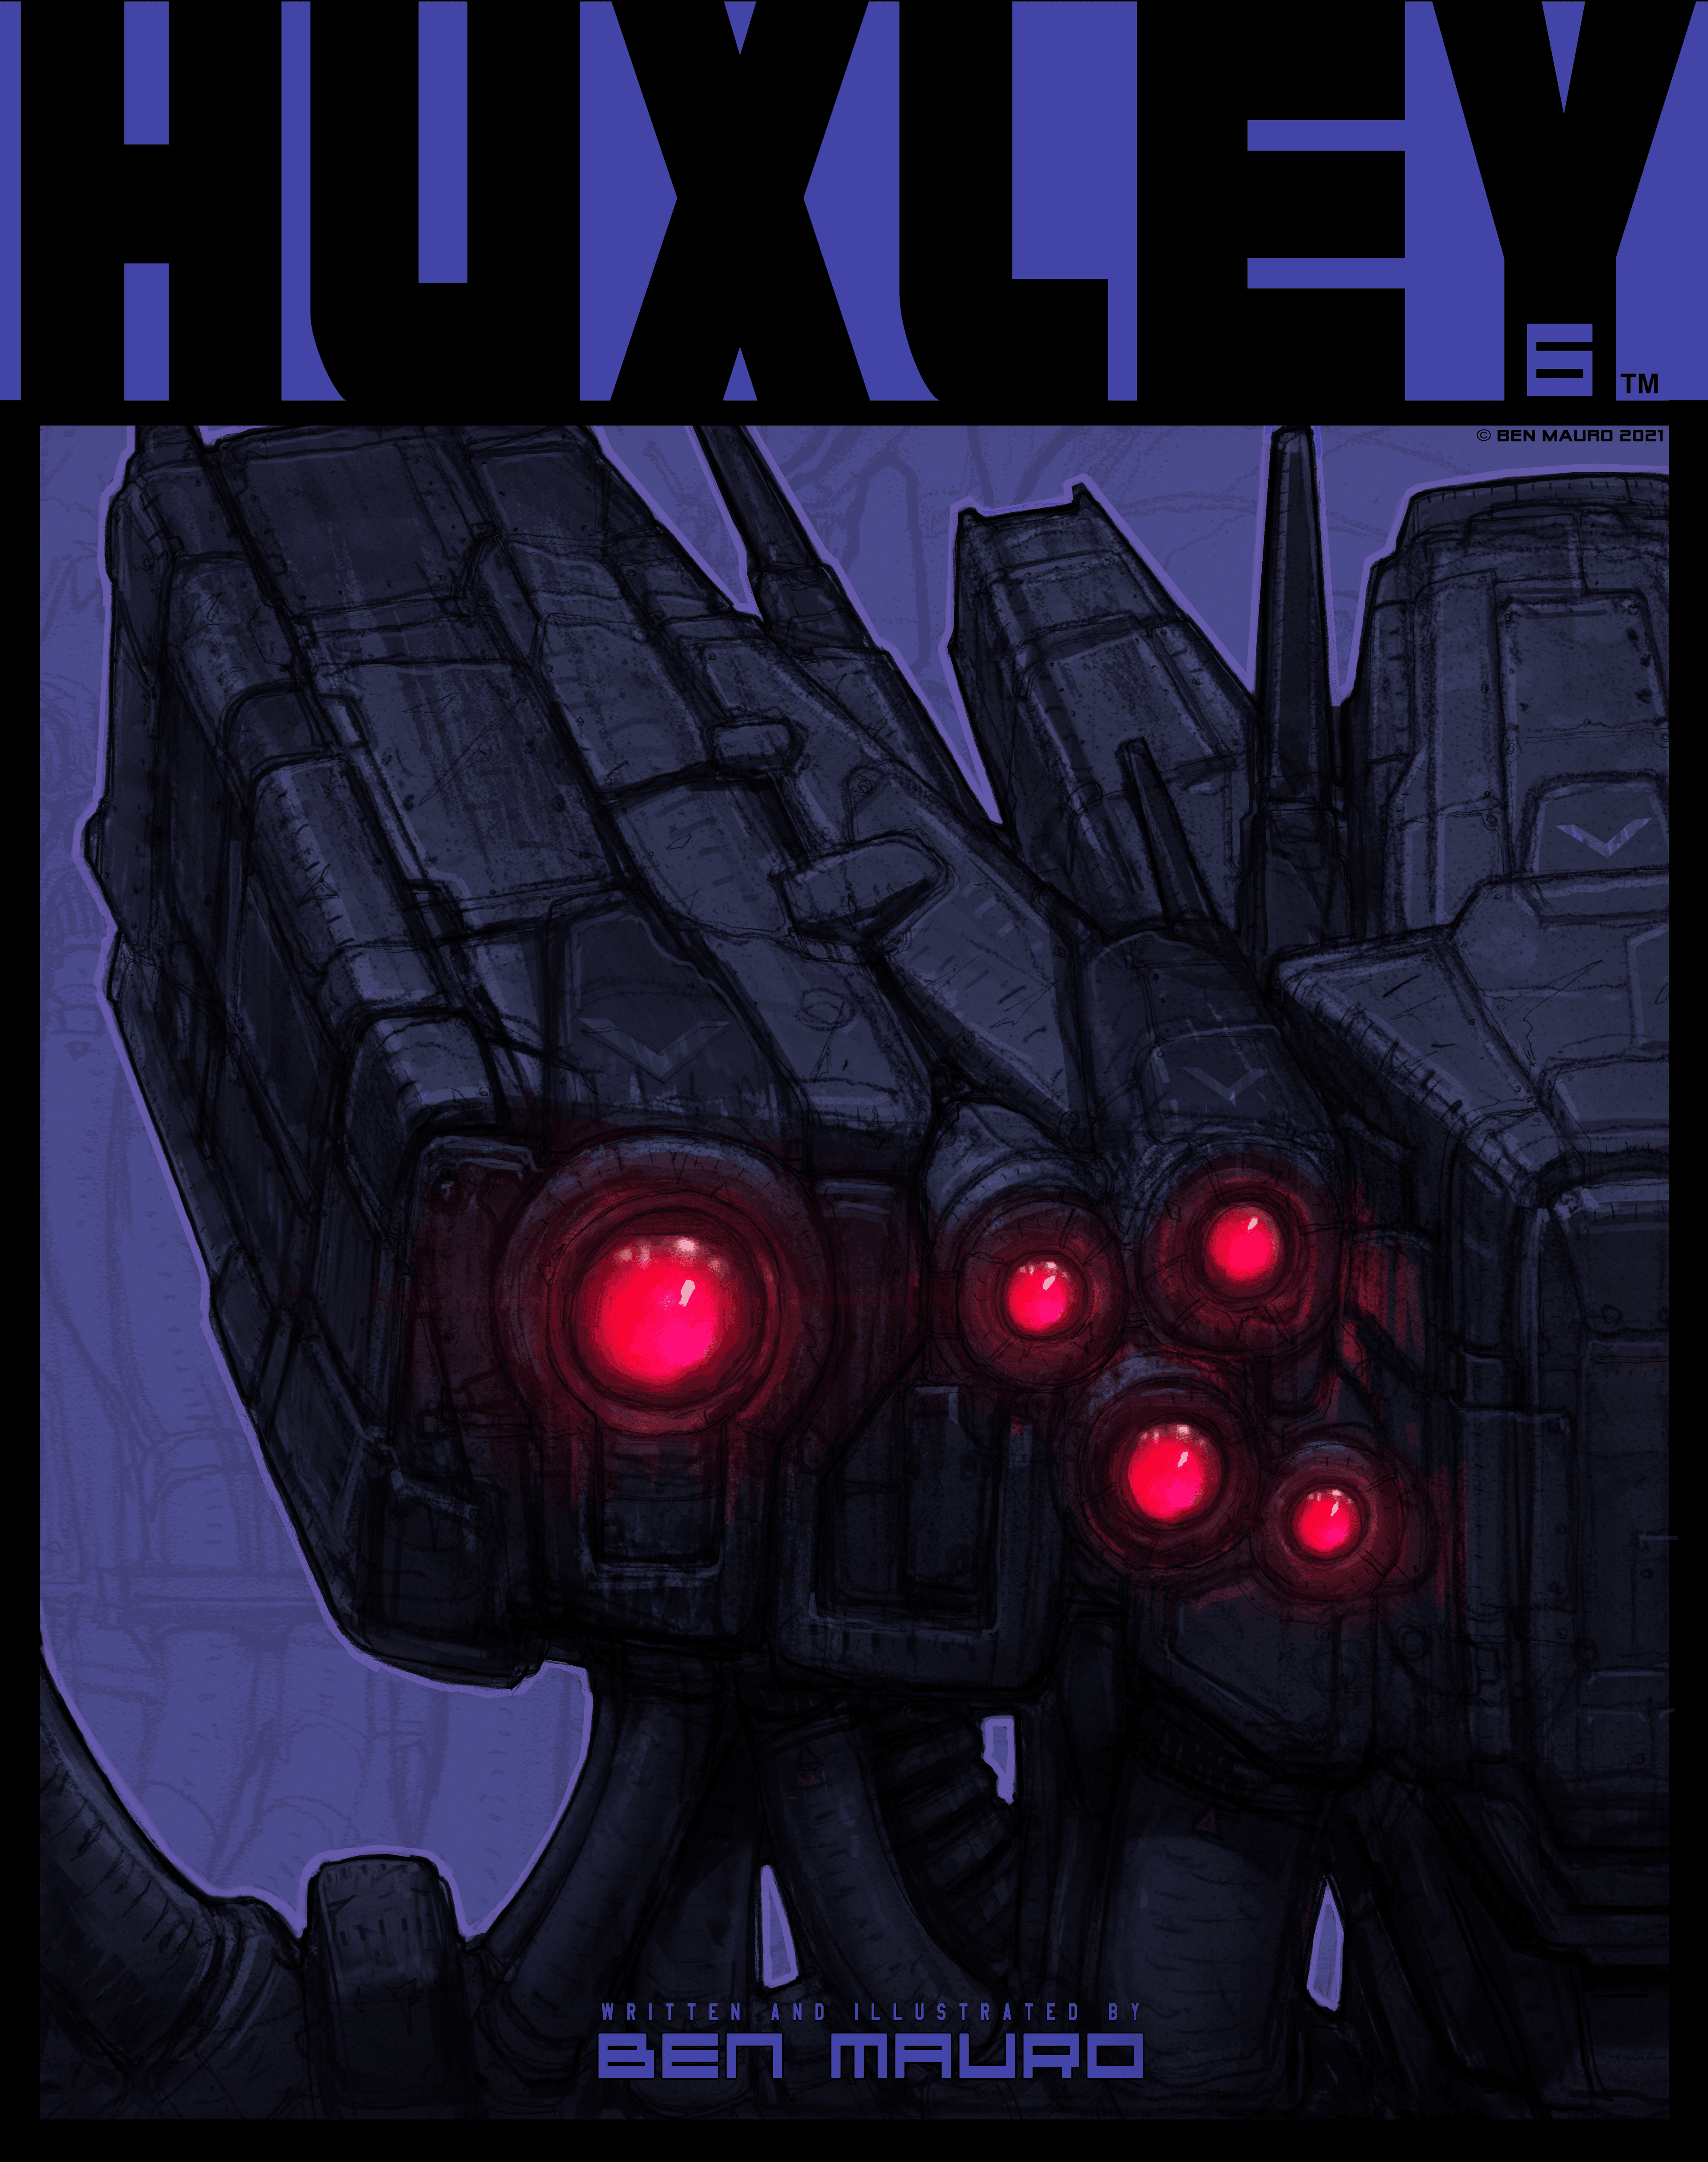 HUXLEY Comic: Issue 6 - First Edition - #64